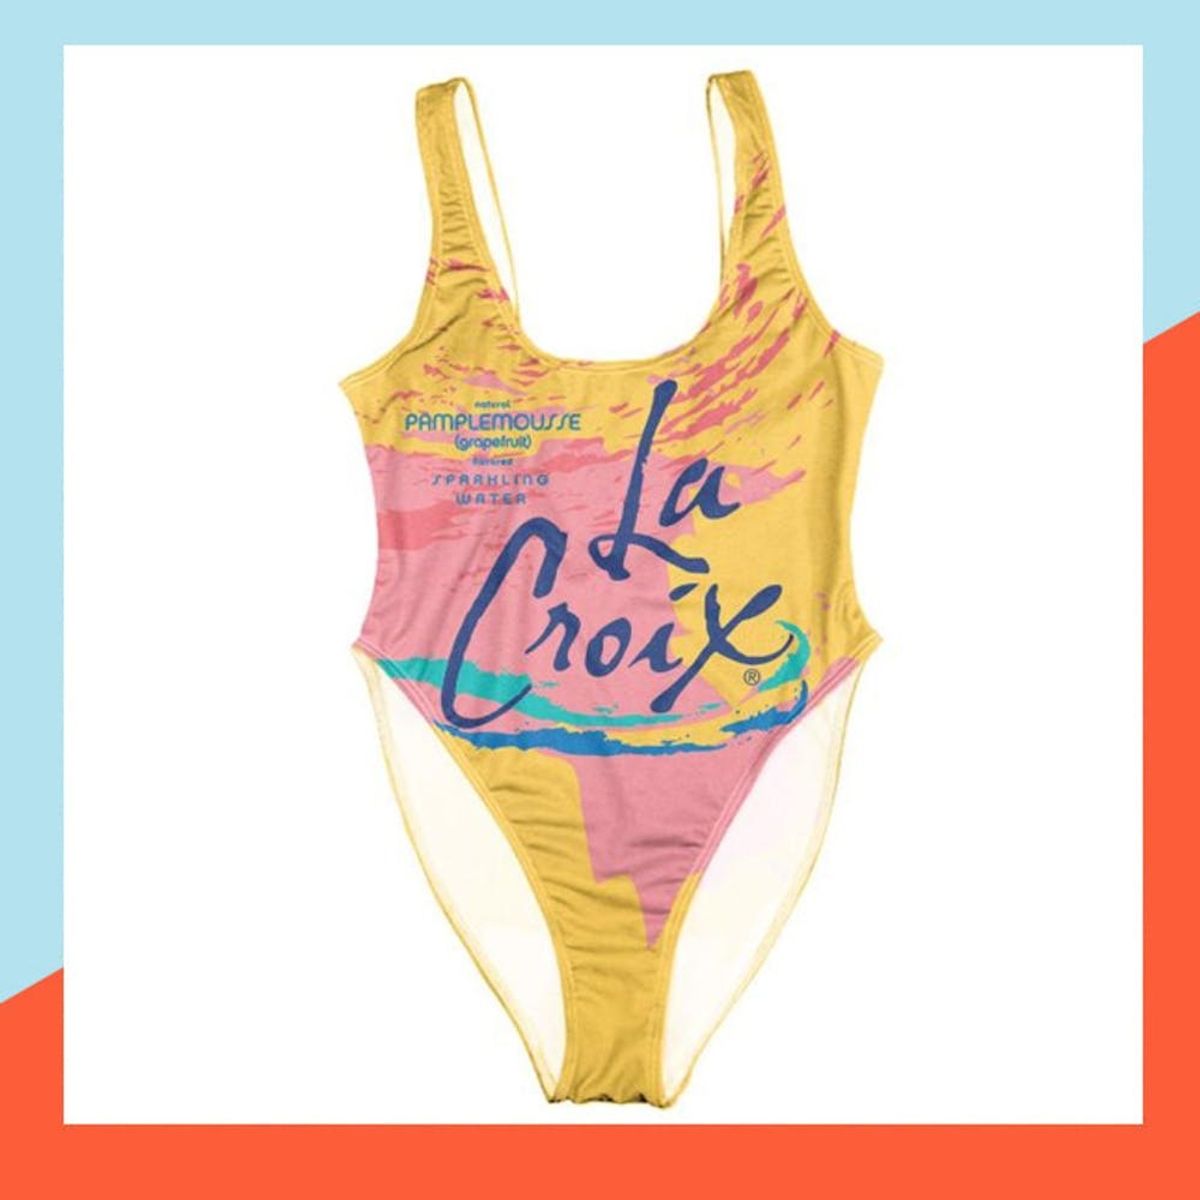 La Croix Bathing Suits Are Here, Just in Time for Summer Parties